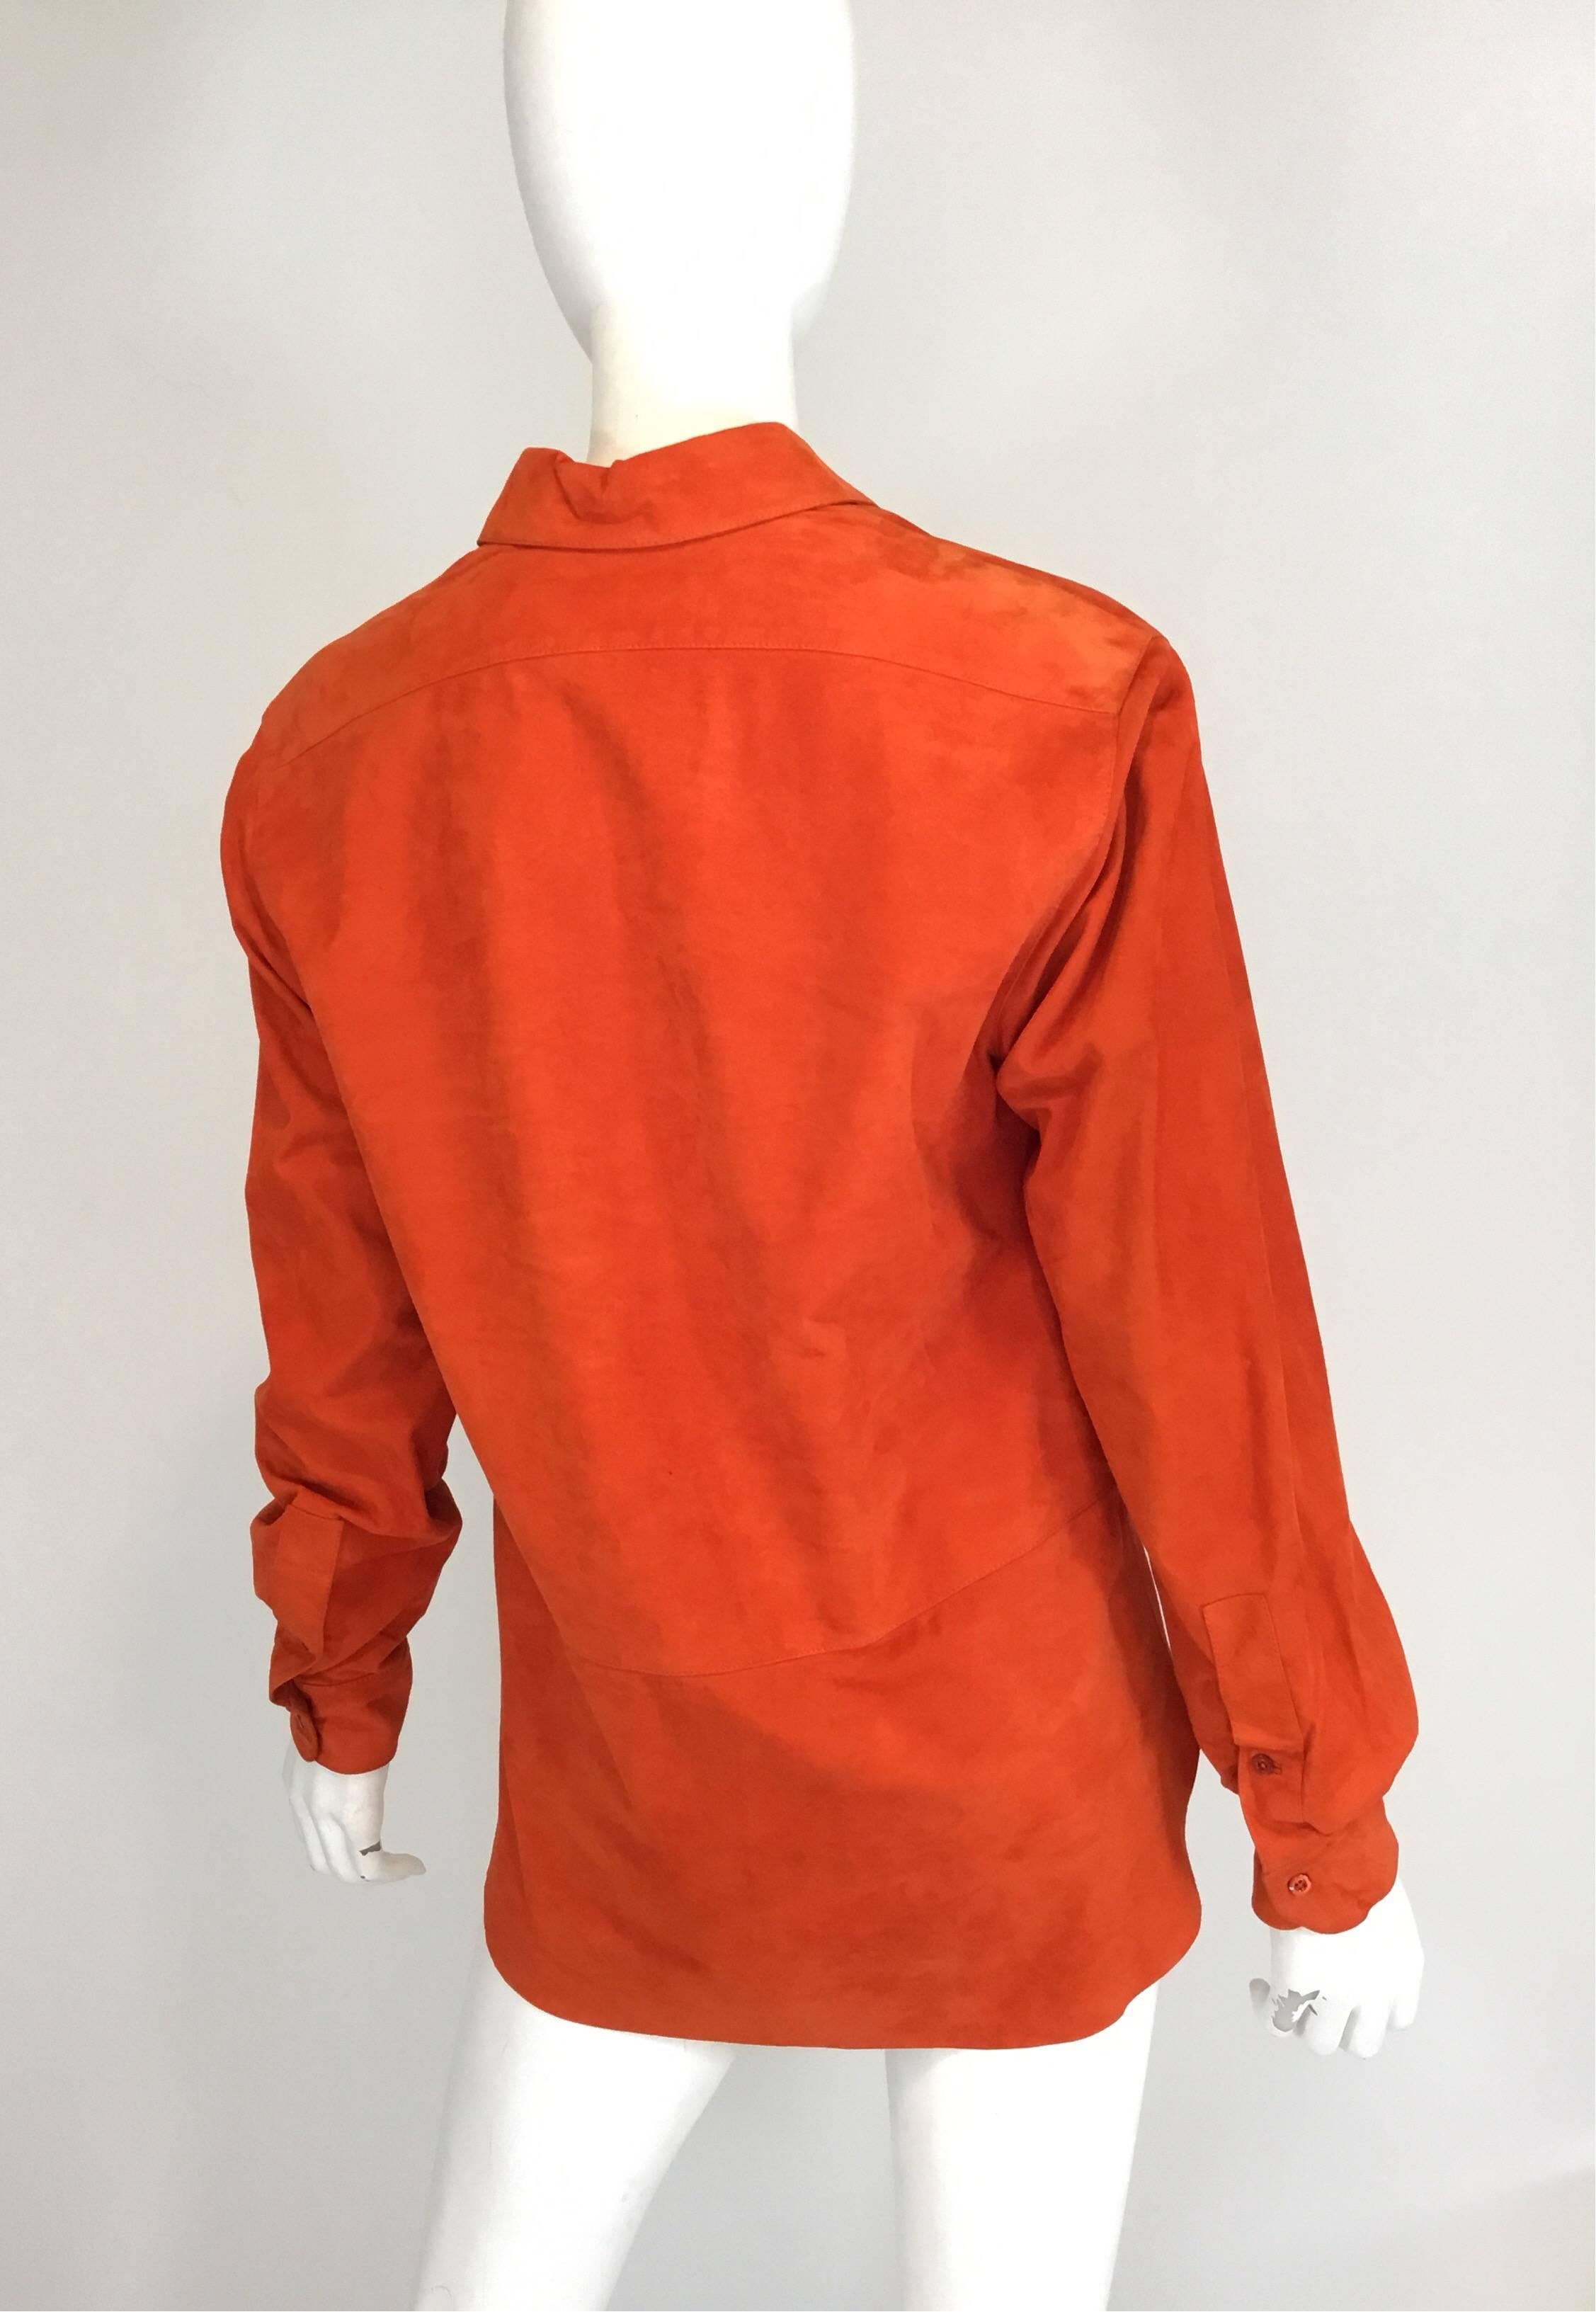 Ralph Lauren top made of 100% goat suede in a rust orange color with one button closure at the neck. Excellent condition. Top is labeled a size 8 and is made in Italy.

Measurements:
bust- 40''
sleeve- 25''
shoulder to shoulder- 17''
length- 29''